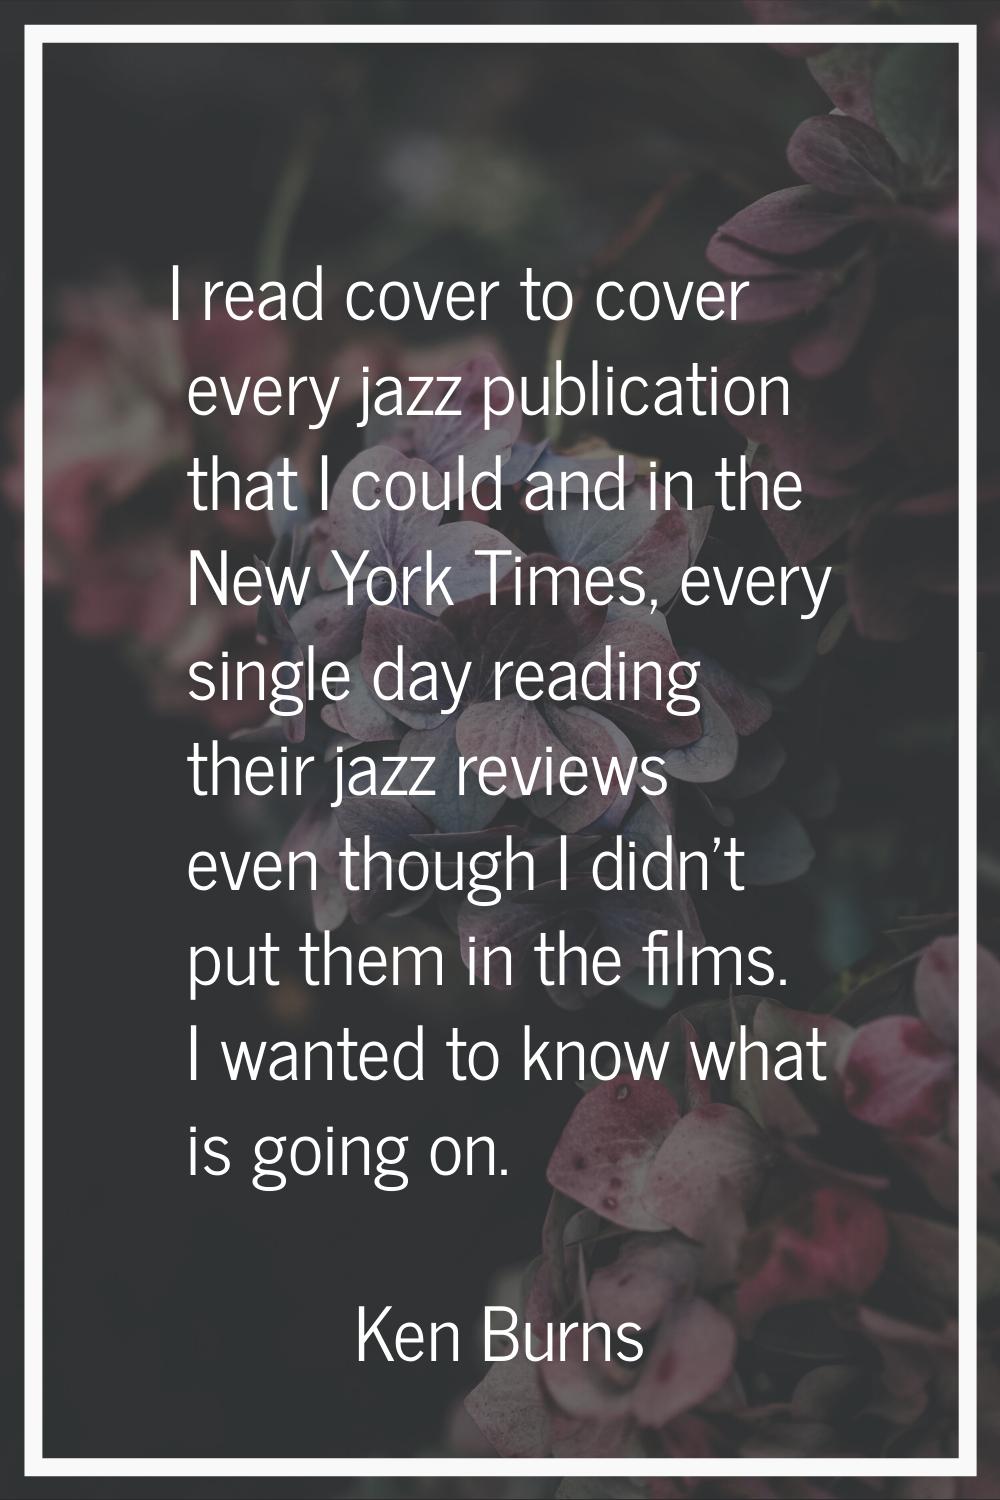 I read cover to cover every jazz publication that I could and in the New York Times, every single d